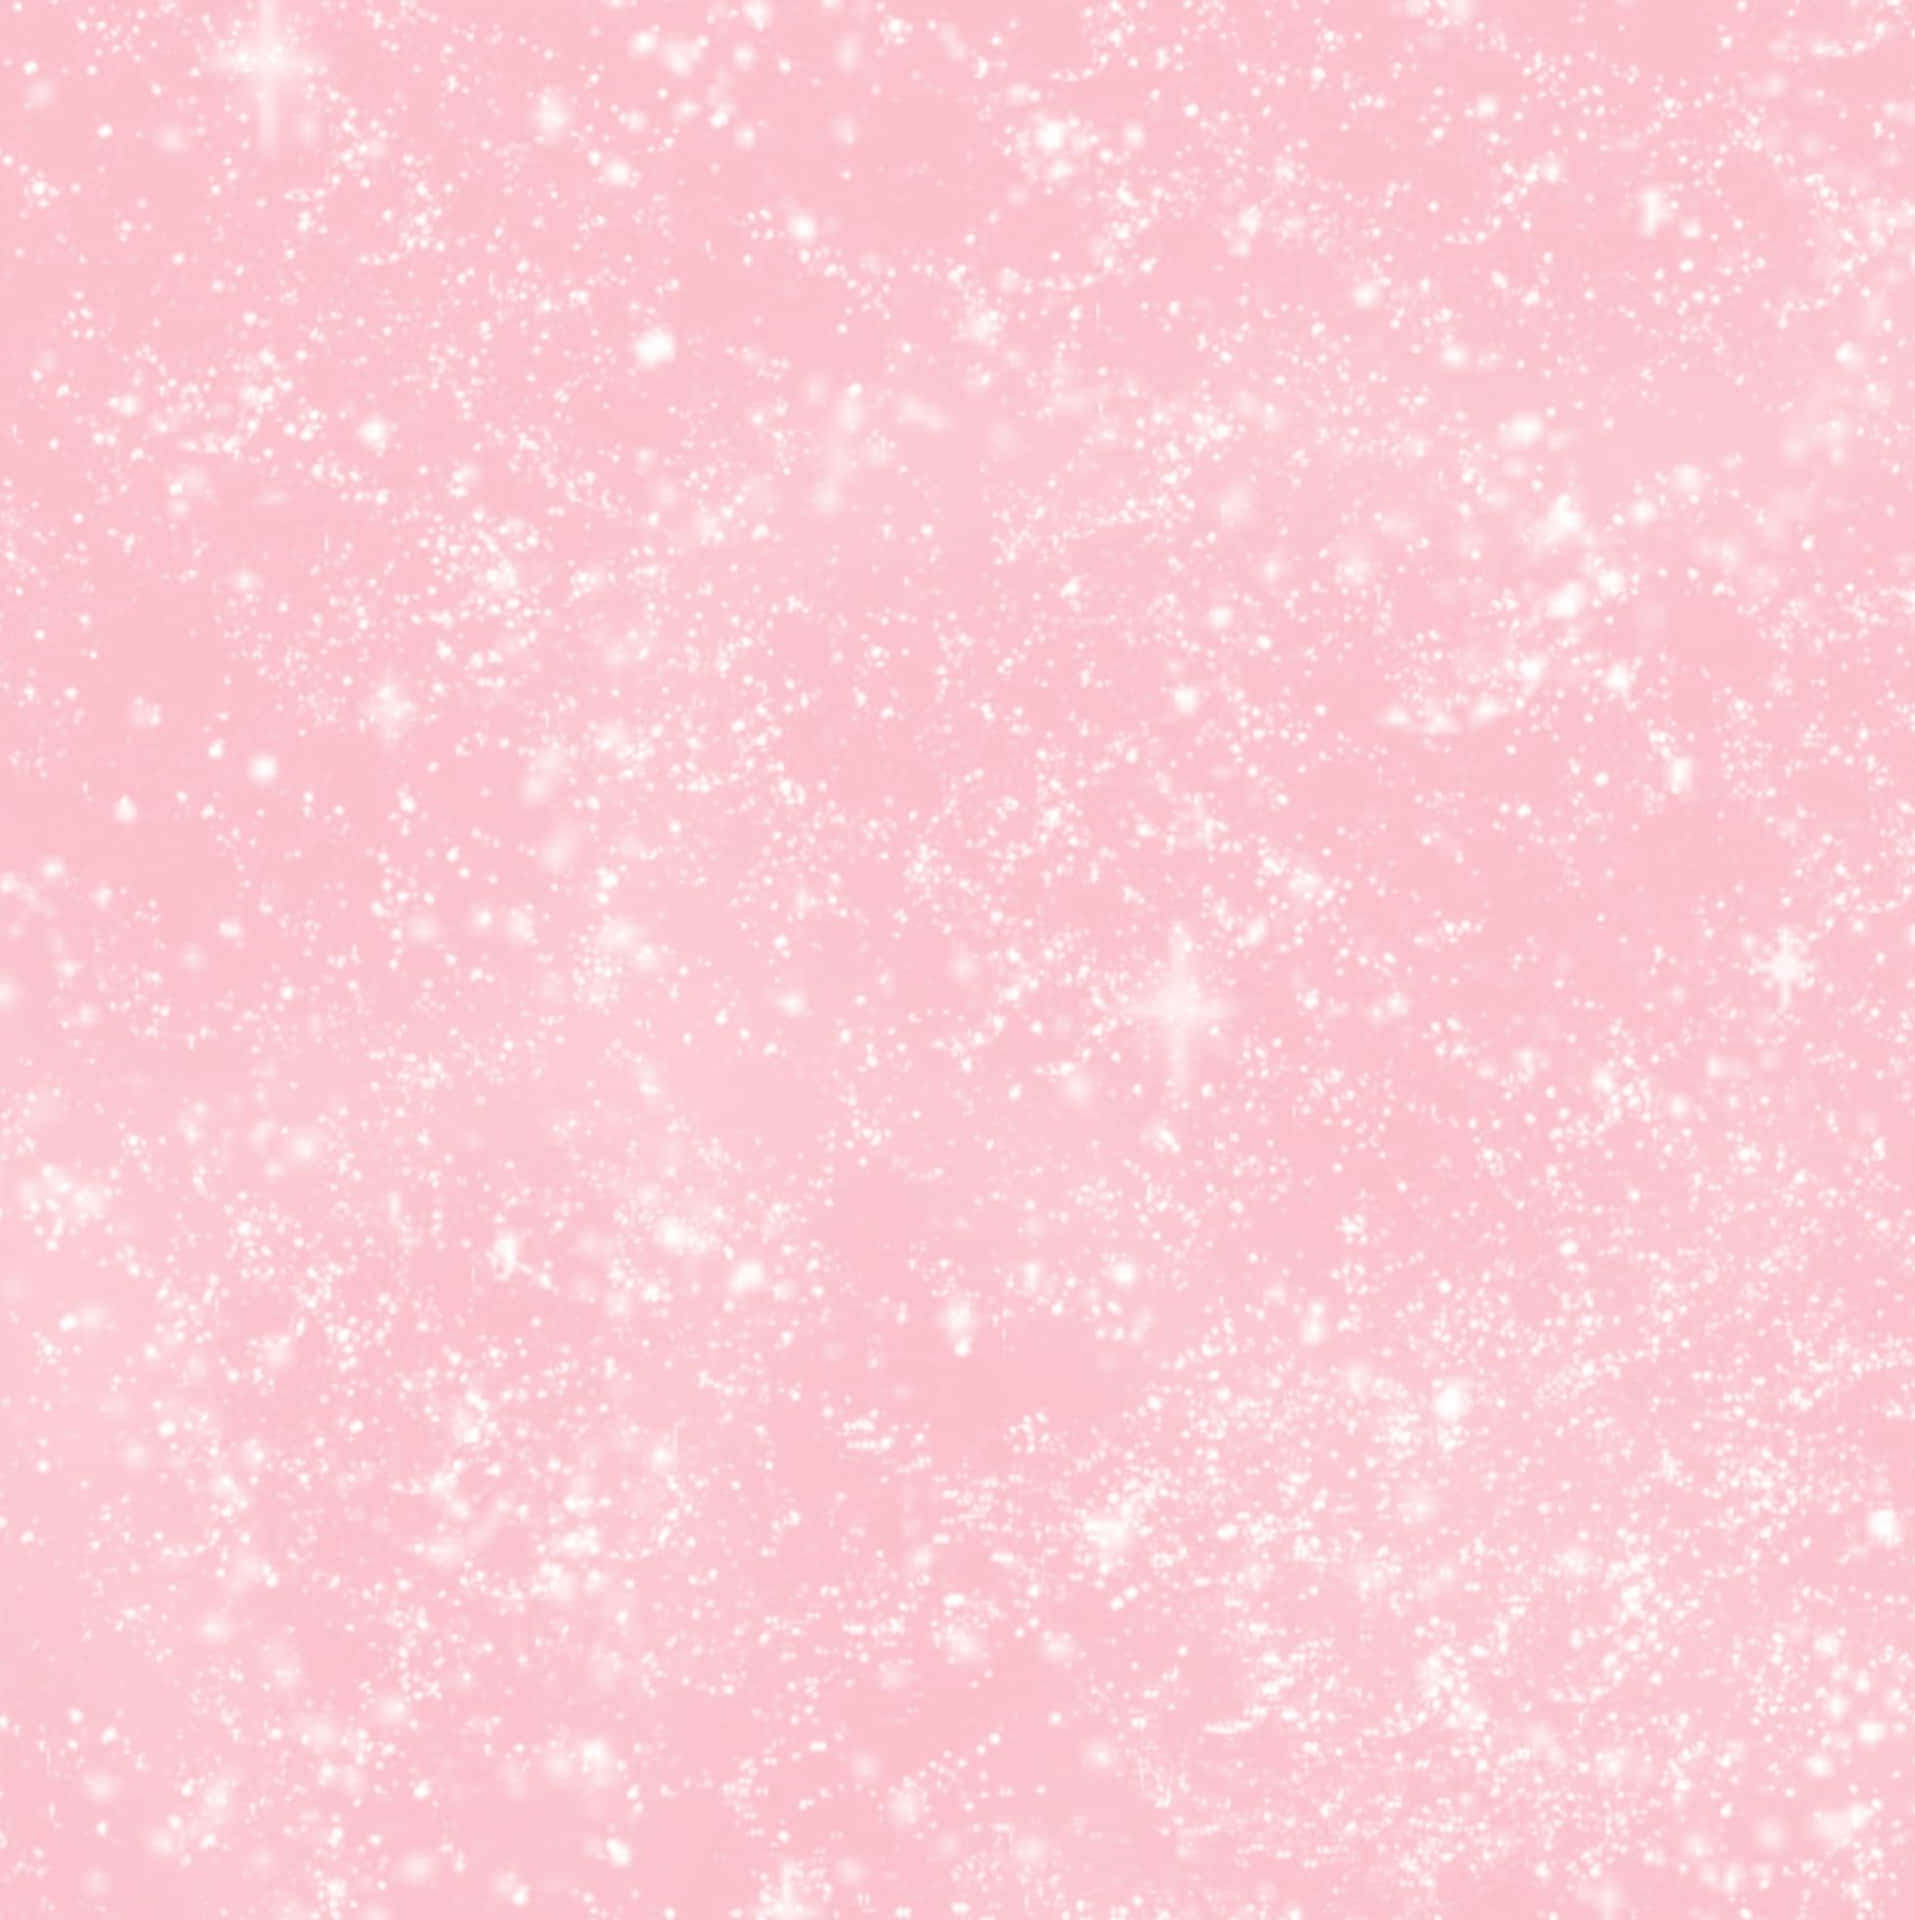 Dust And Sparkles On Pink Blush Background